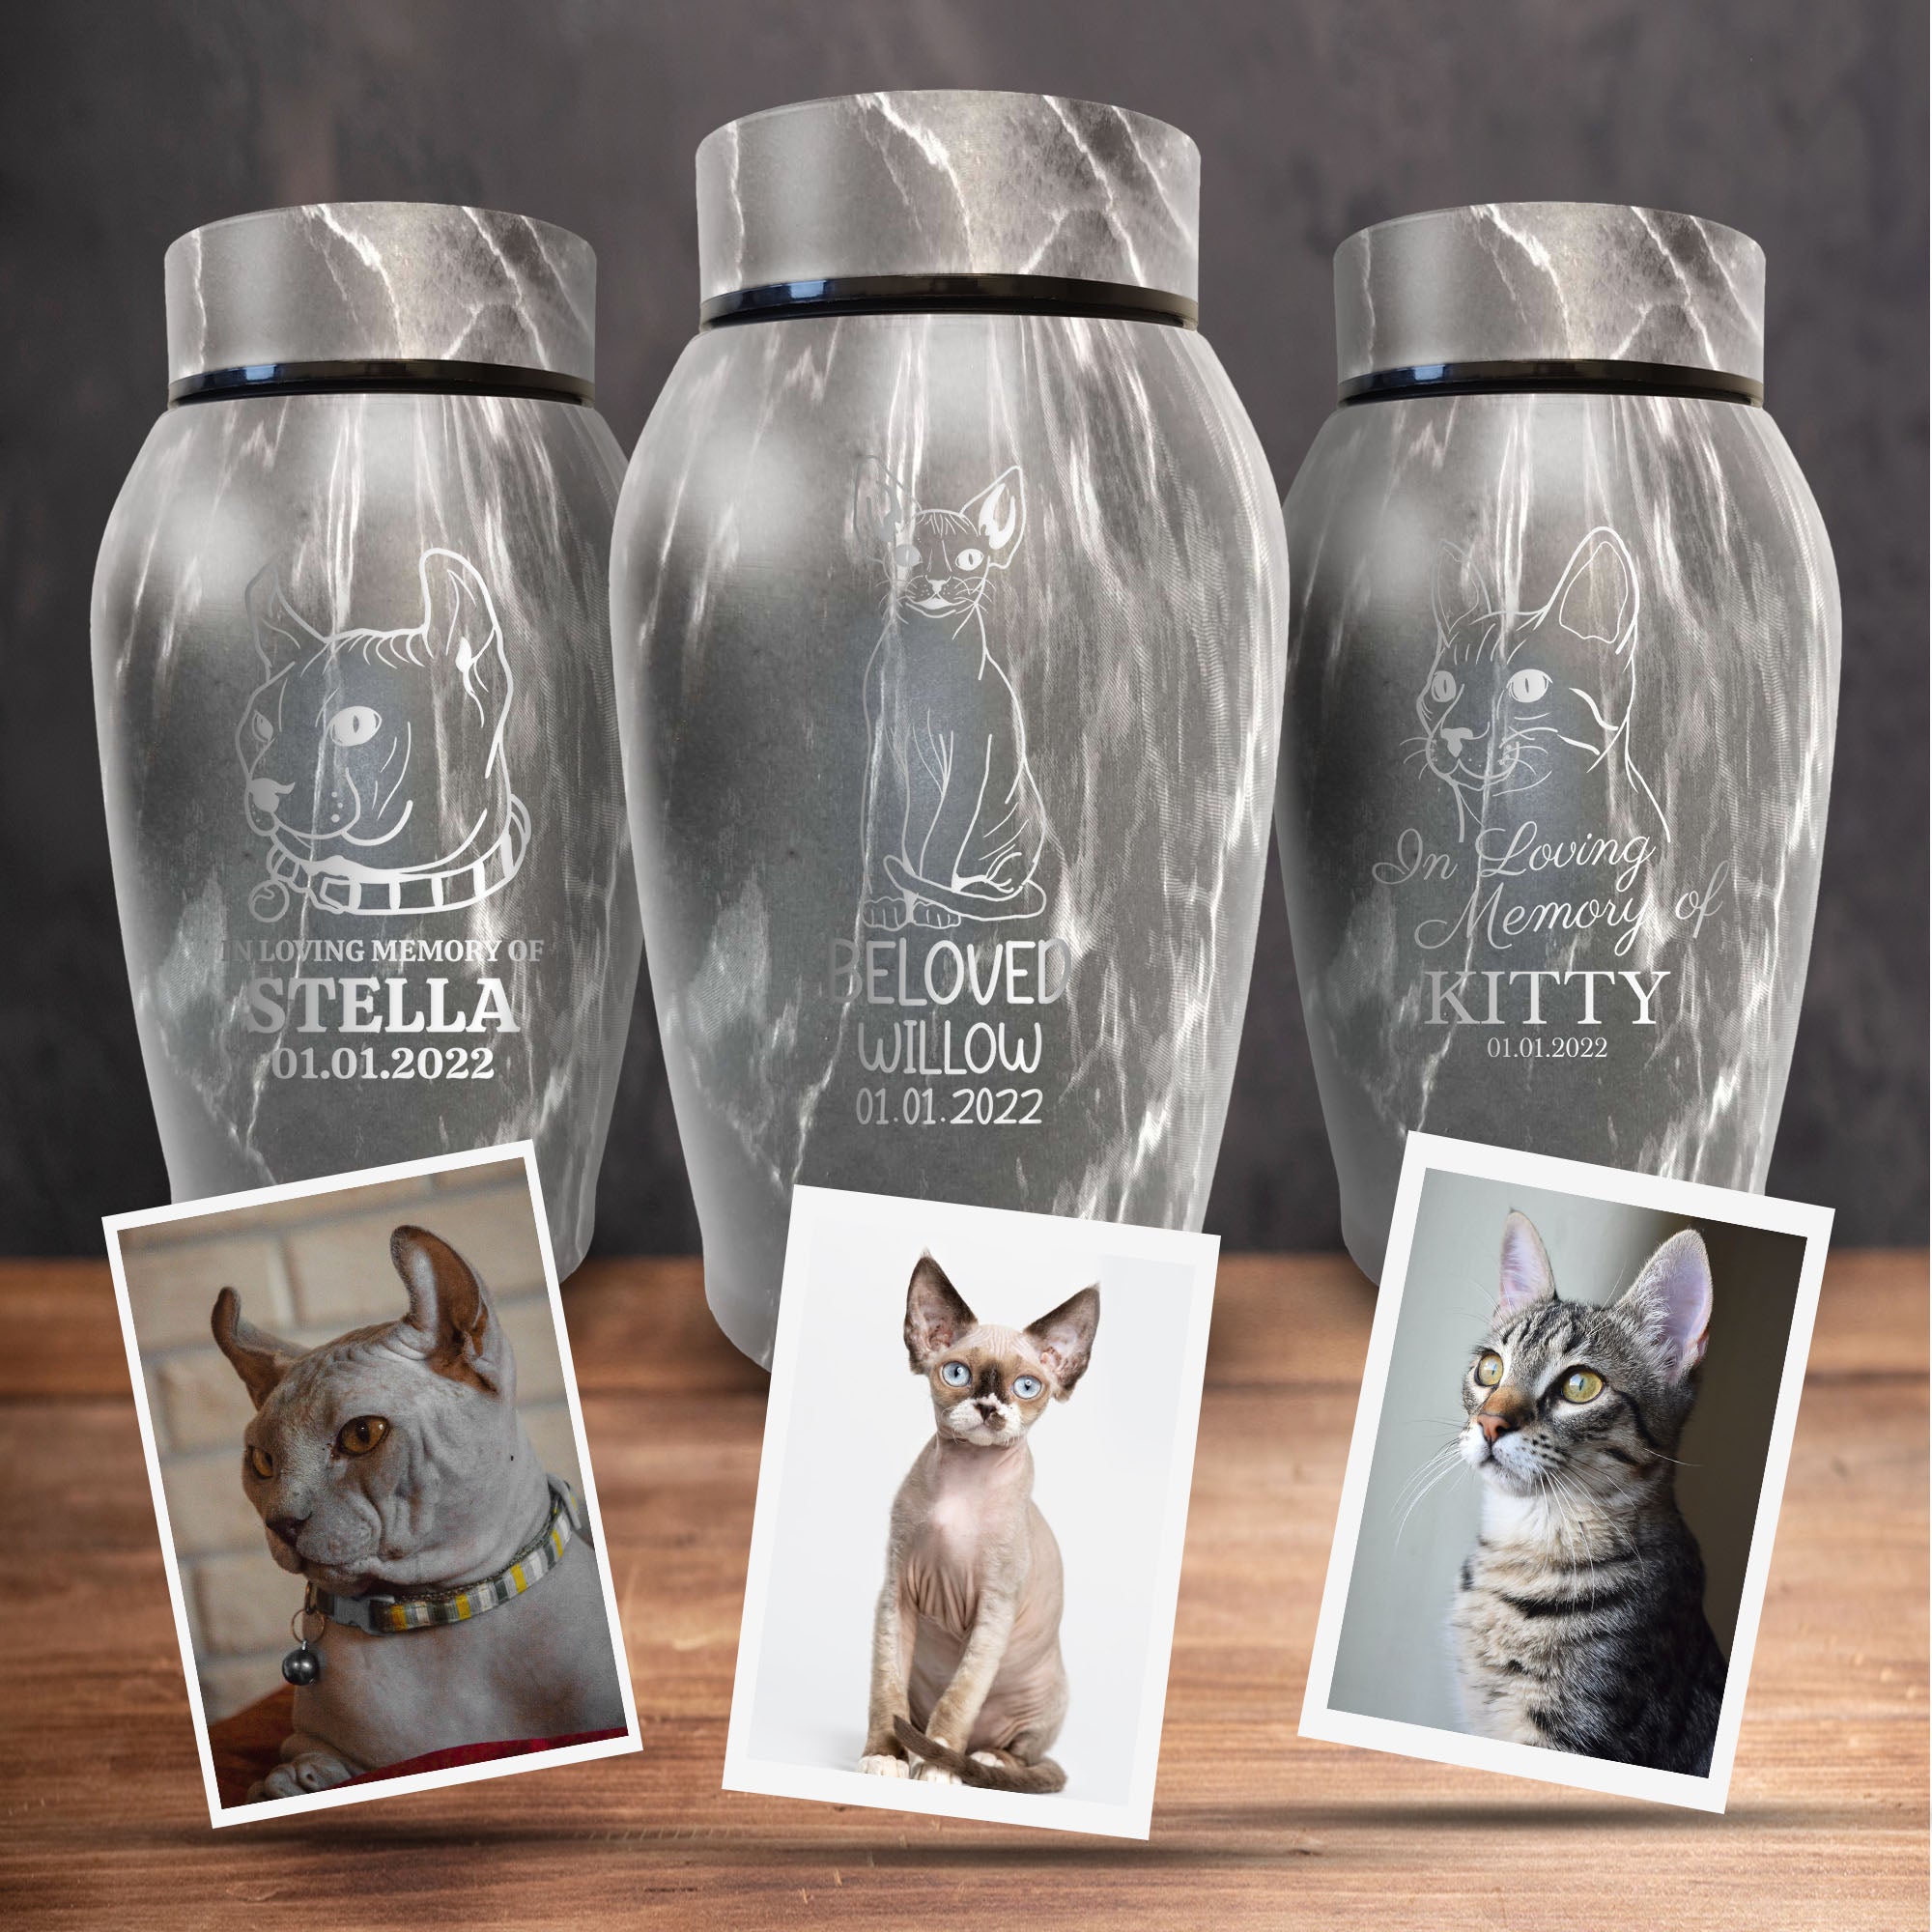 Custom Engraved Pet Photo/Image Stone Gray Urn - Personalized Textured Cremation Urn - Stainless Steel Urn for Cat Memorial Ashes | Gray